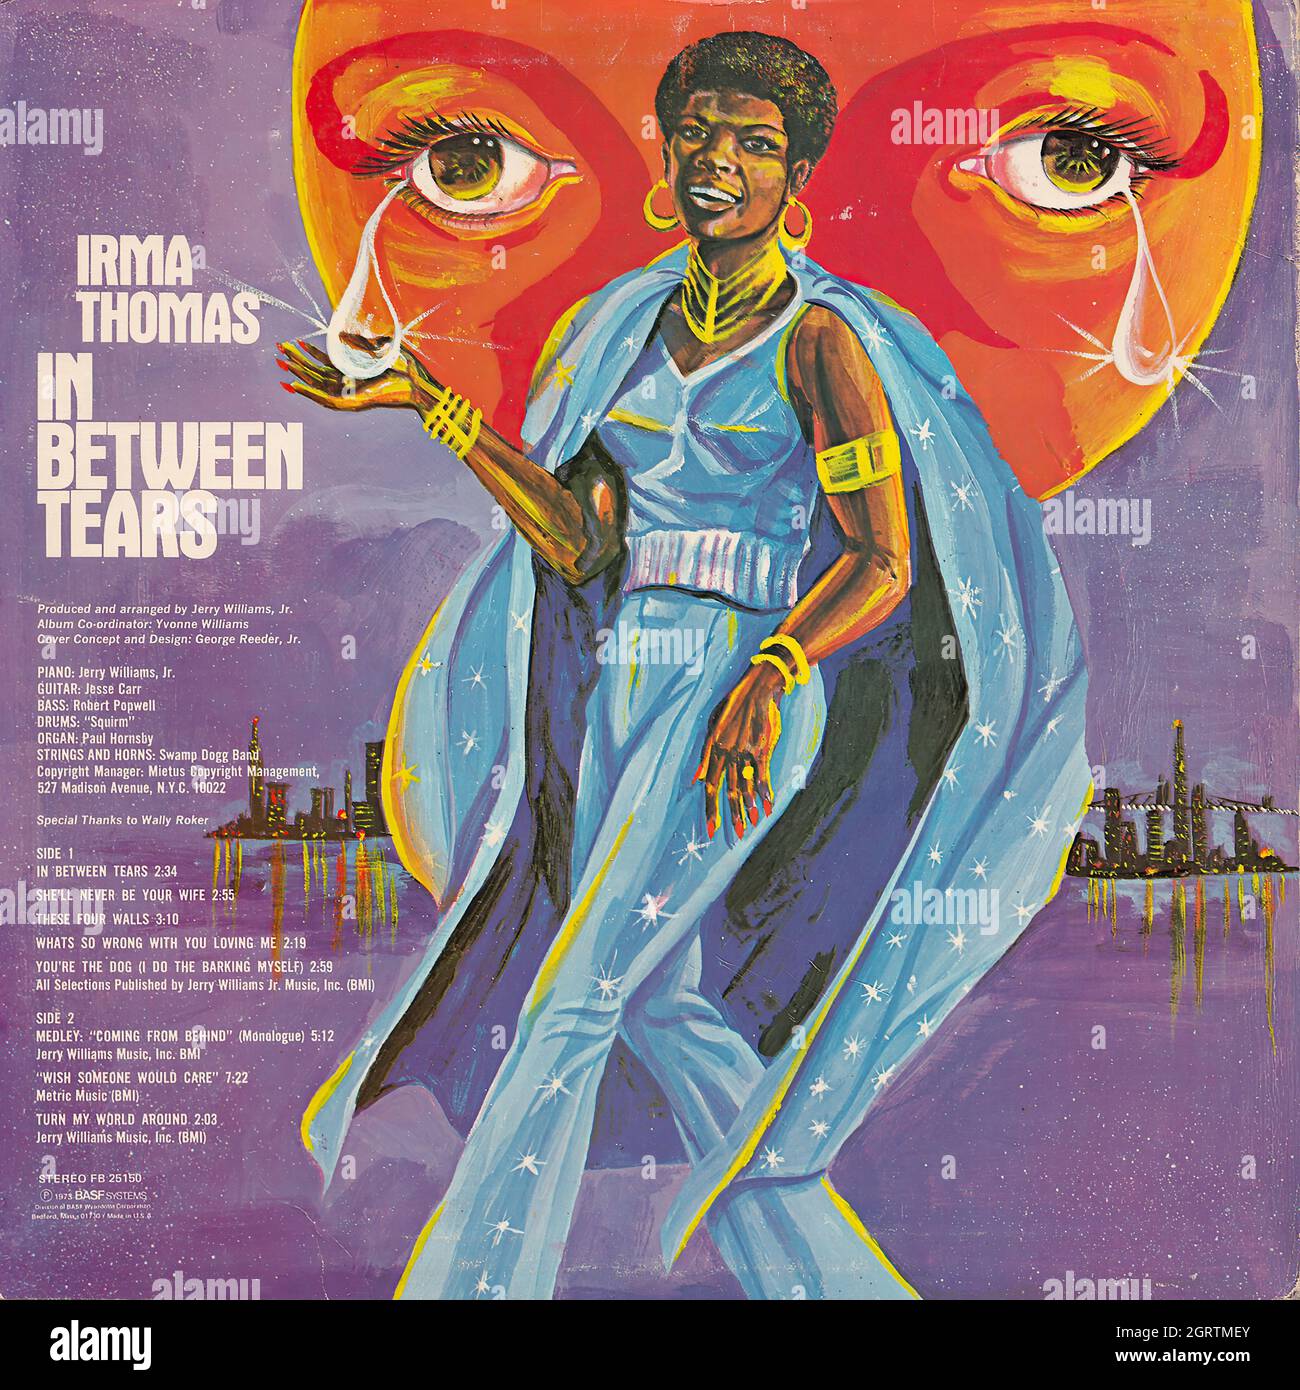 Irma Thomas - In between tears (back cover) - Vintage Vinyl Record Cover Stock Photo